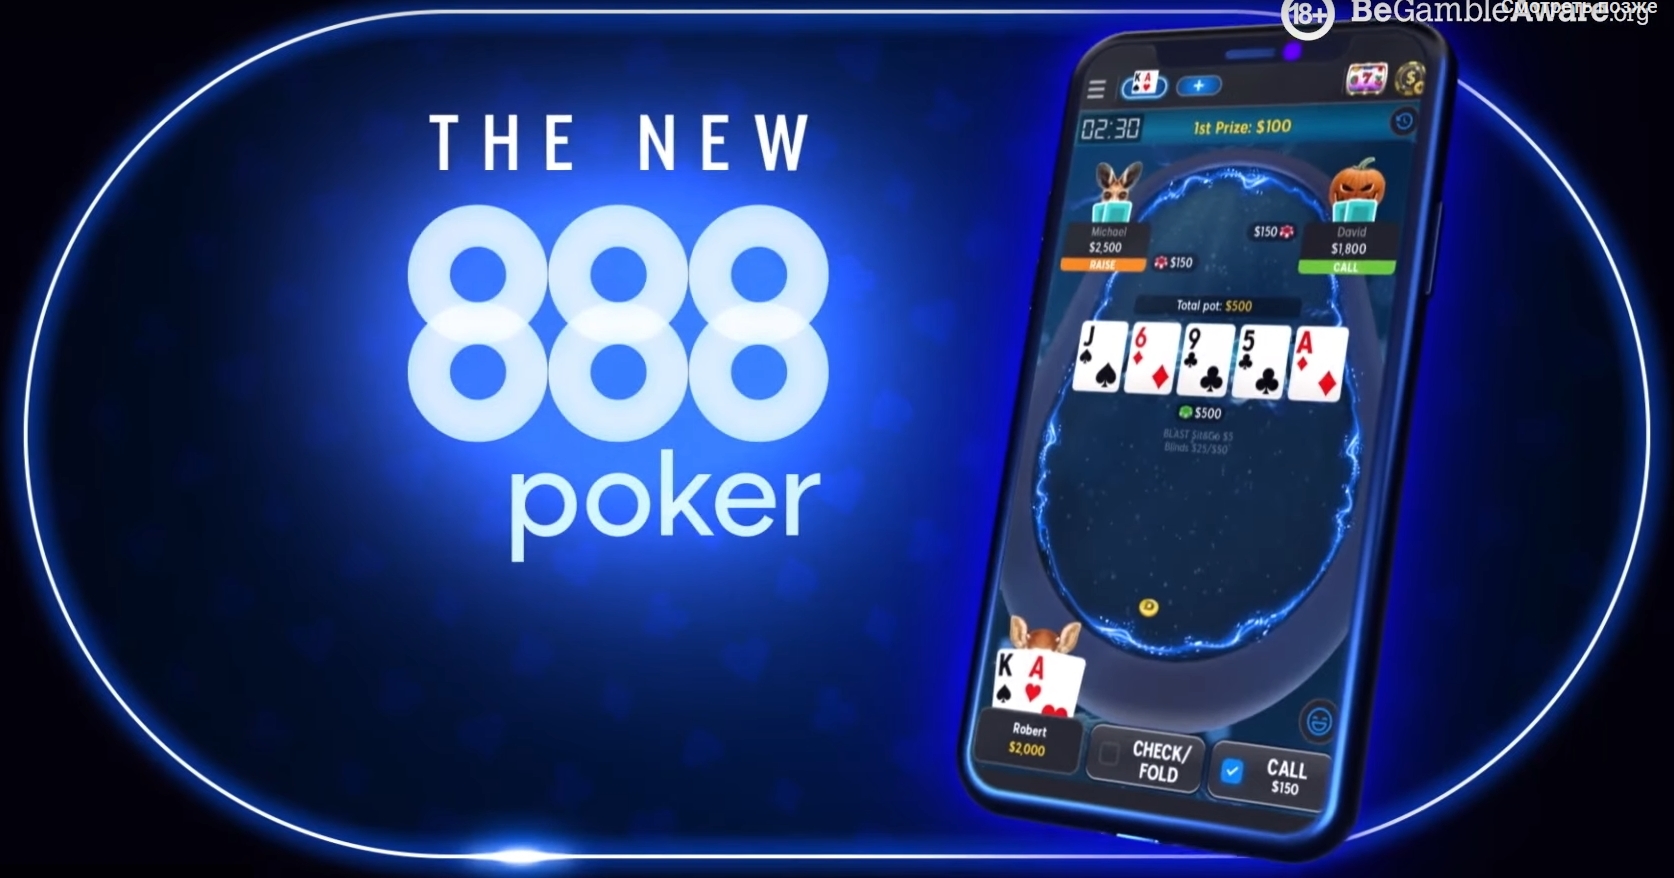 The 888 Poker mobile client looks great. 